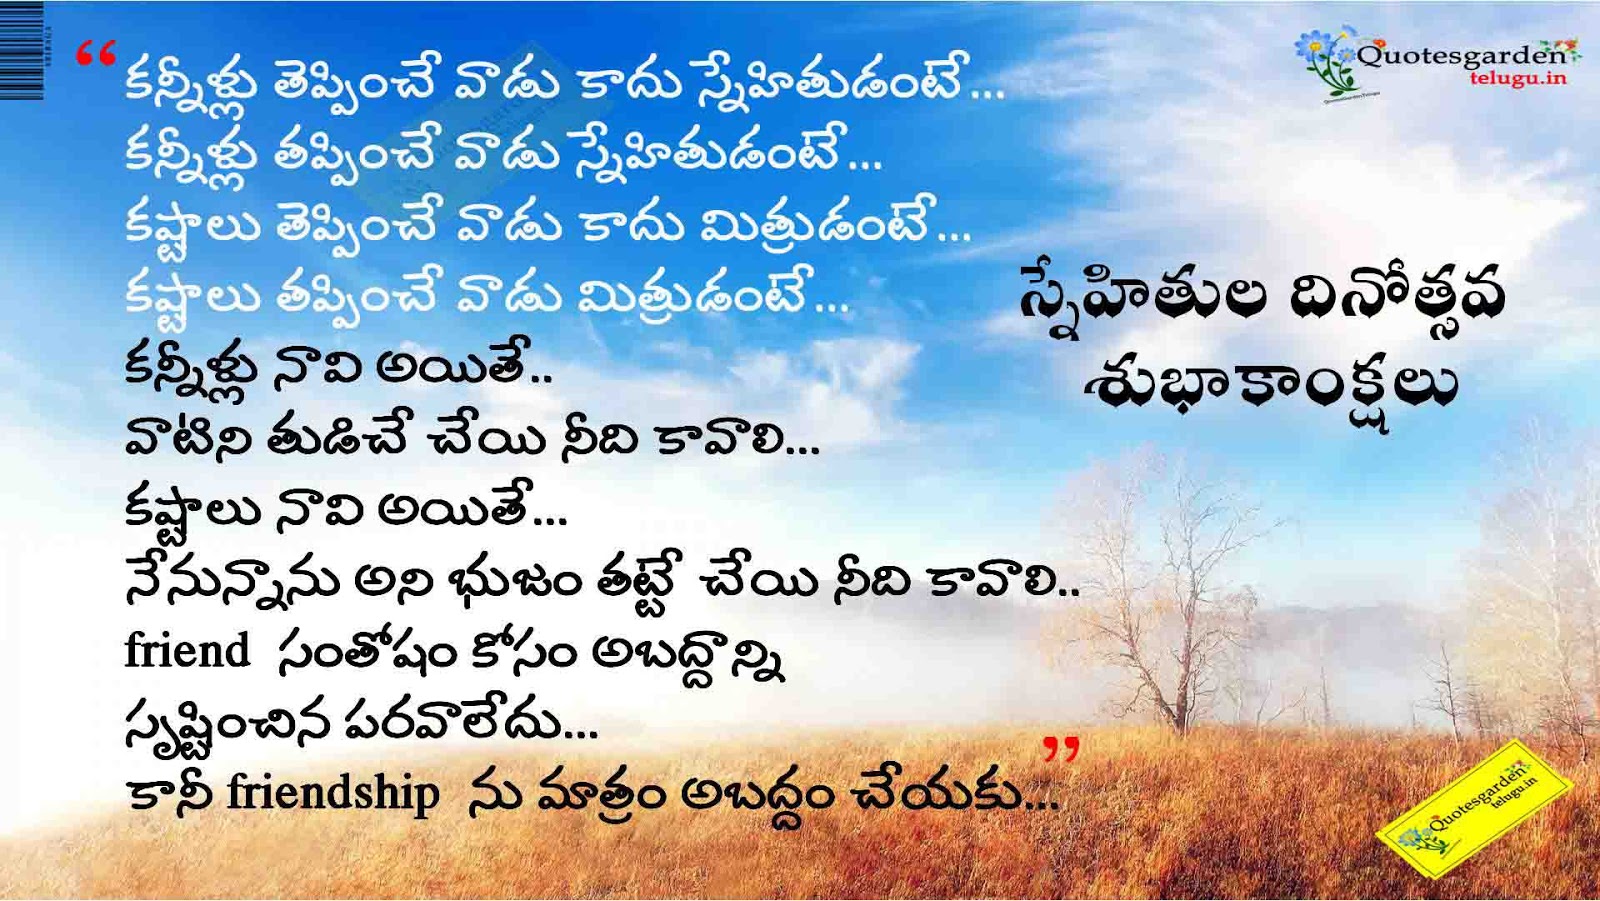 Friendship day quotes wishes in telugu with Hd wallpapers | QUOTES ...